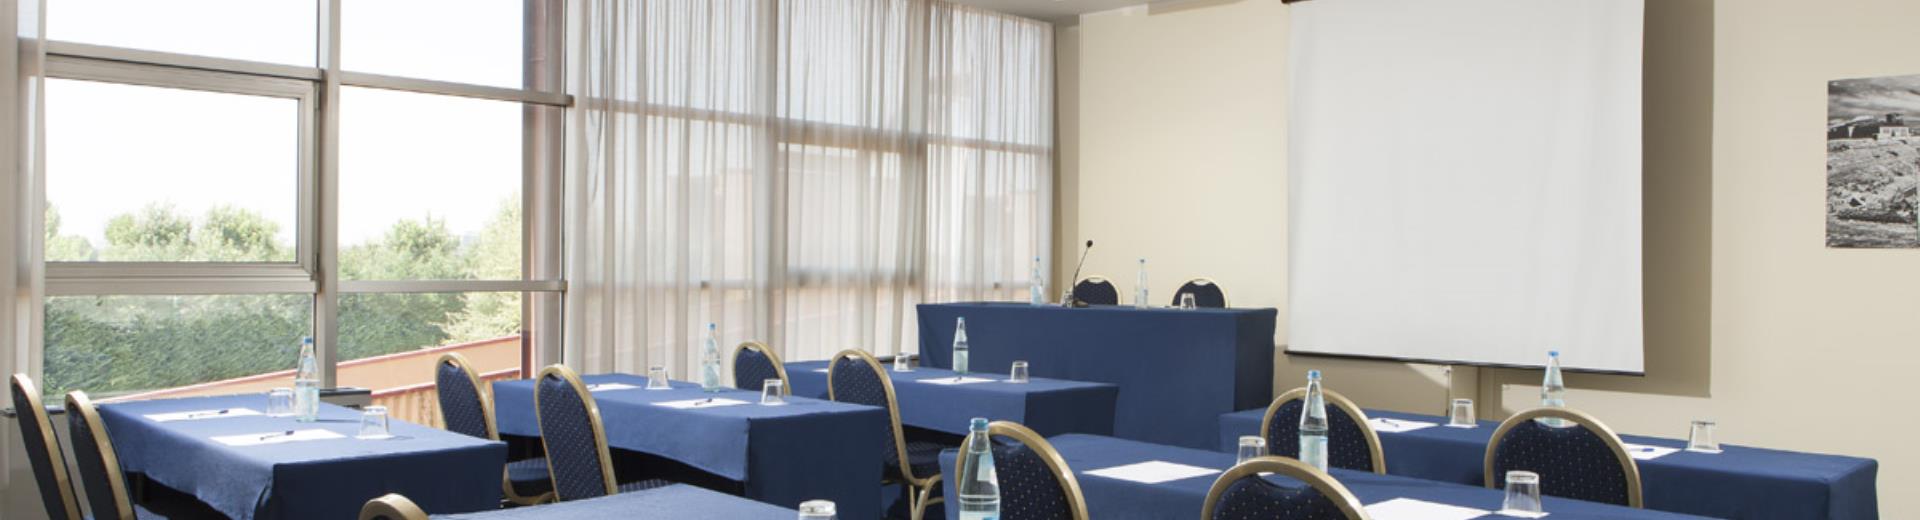 Meeting and conference rooms in Verona 
Do you have to organize an event? Are you looking for a meeting room in Verona? Discover the Best Western CTC Hotel Verona